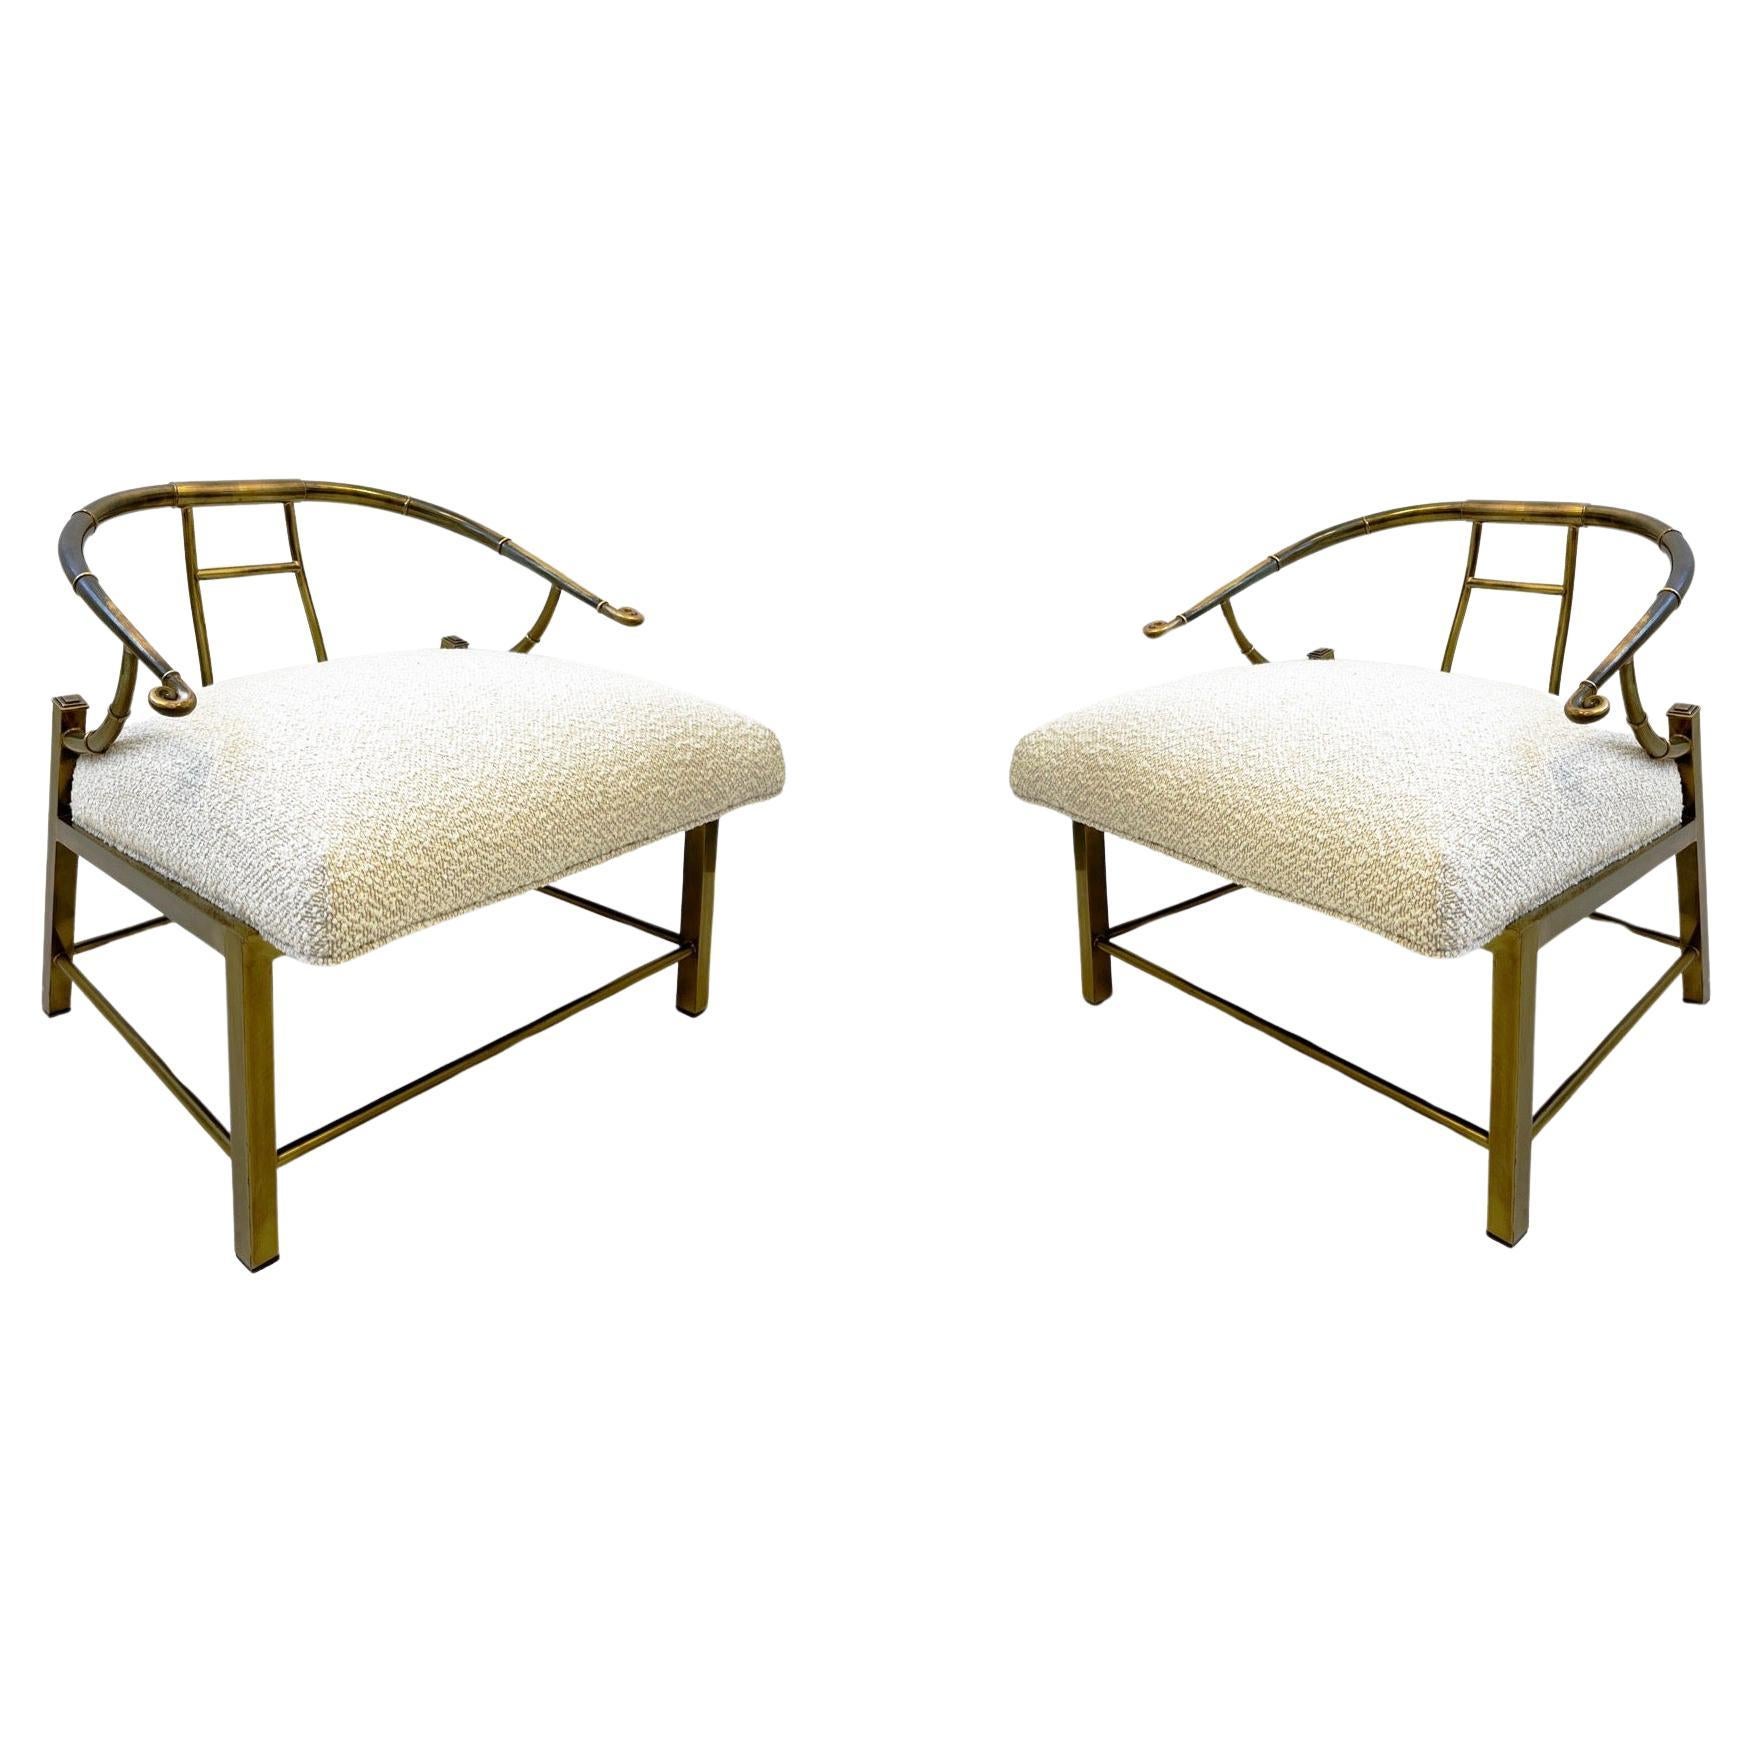 Pair of Aged Brass Lounge Chairs by Mastercraft For Sale